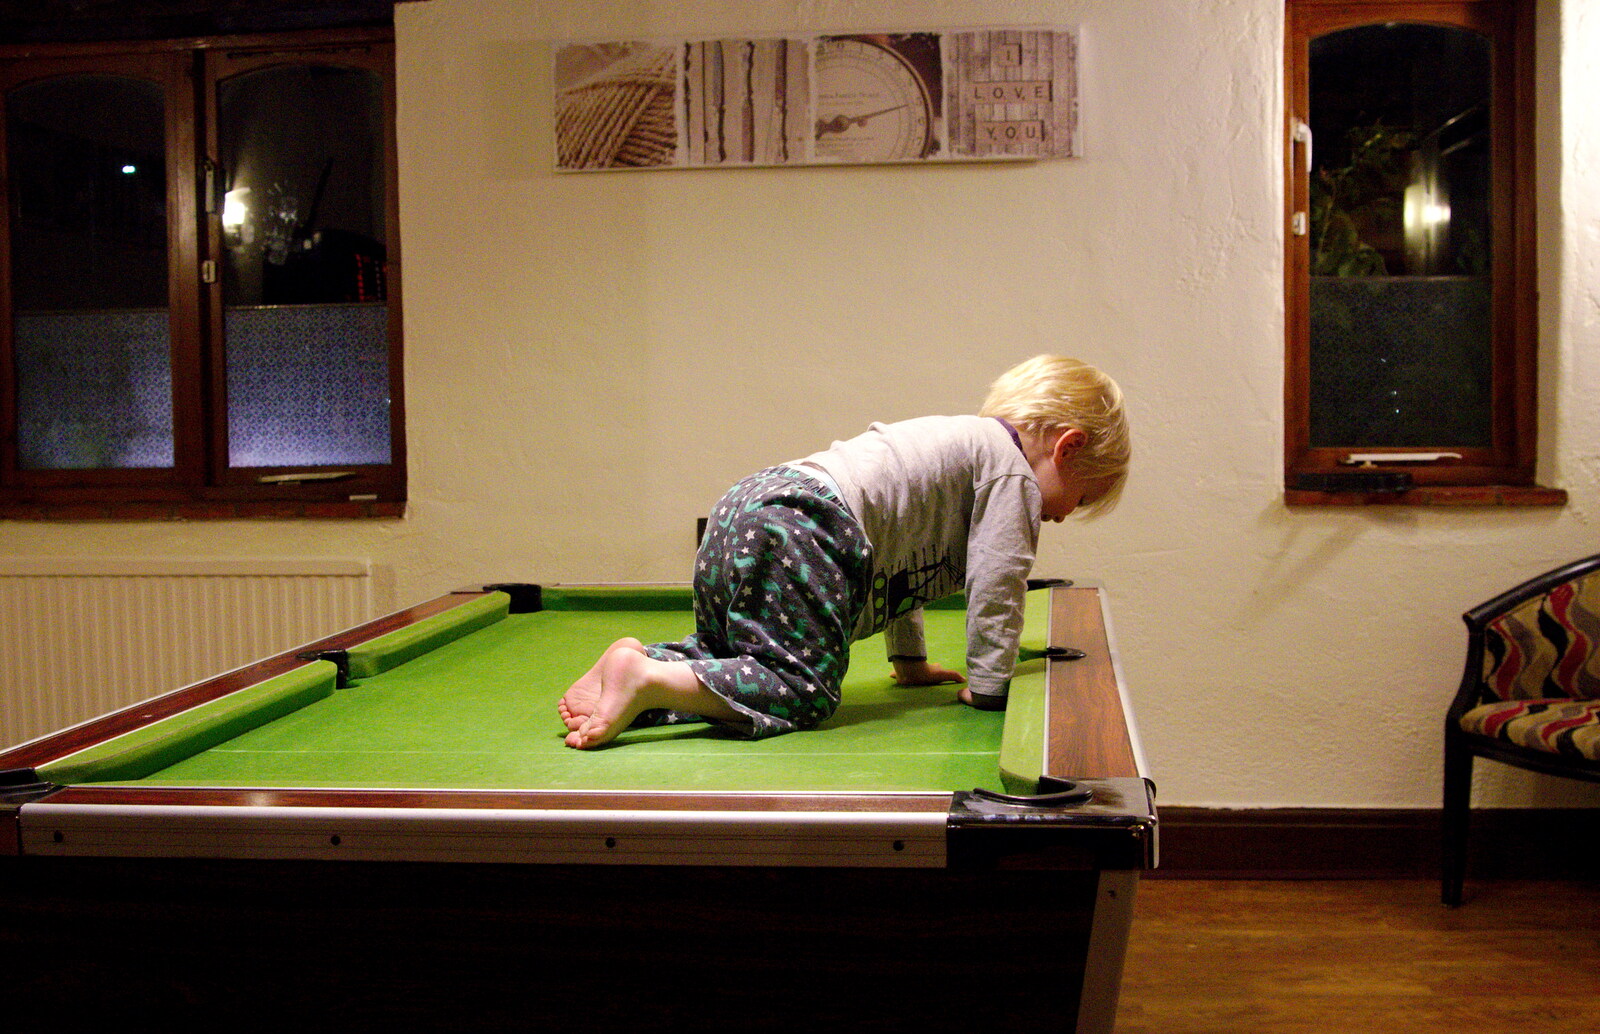 Harry roams around on the pool table from A Return to Bedford: the BSCC Annual Weekend Away, Shefford, Bedfordshire - 10th May 2014